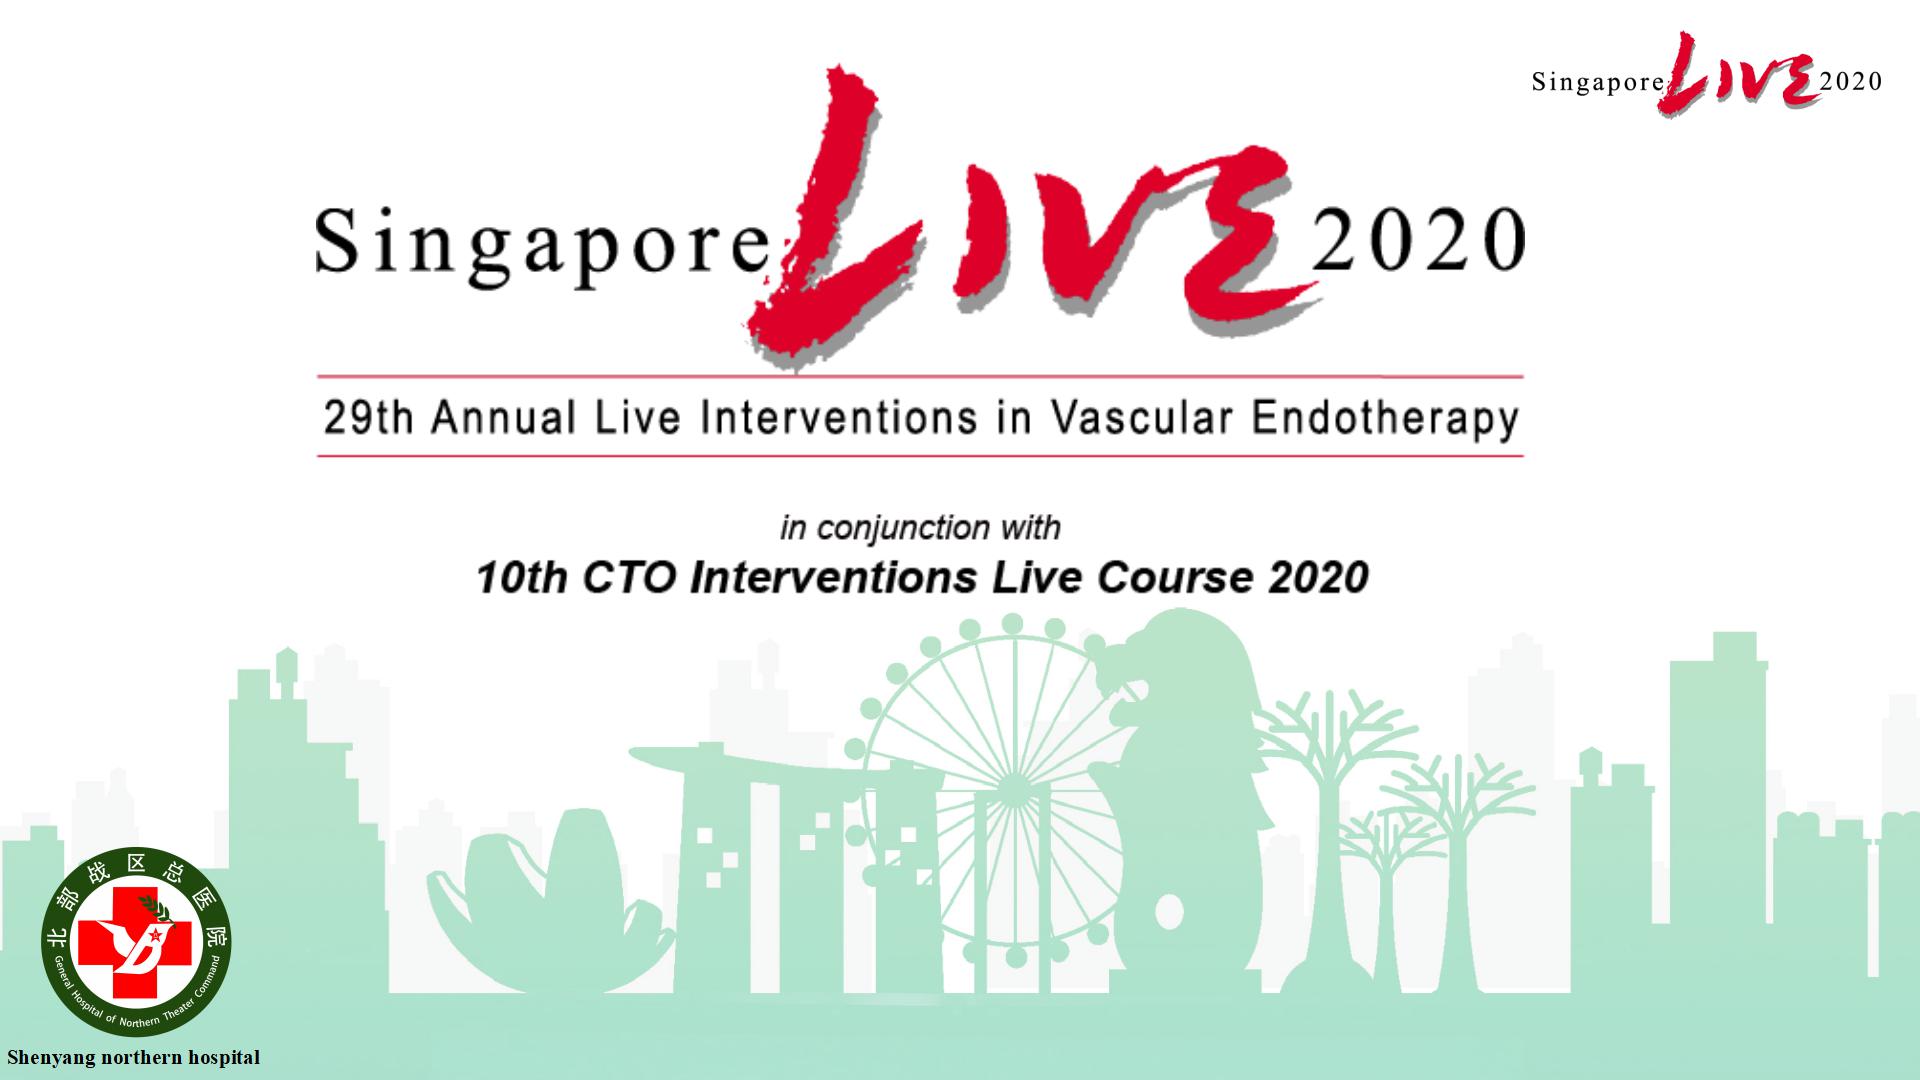 29th Annual Live Lnterventions in Vascular Endotherapy